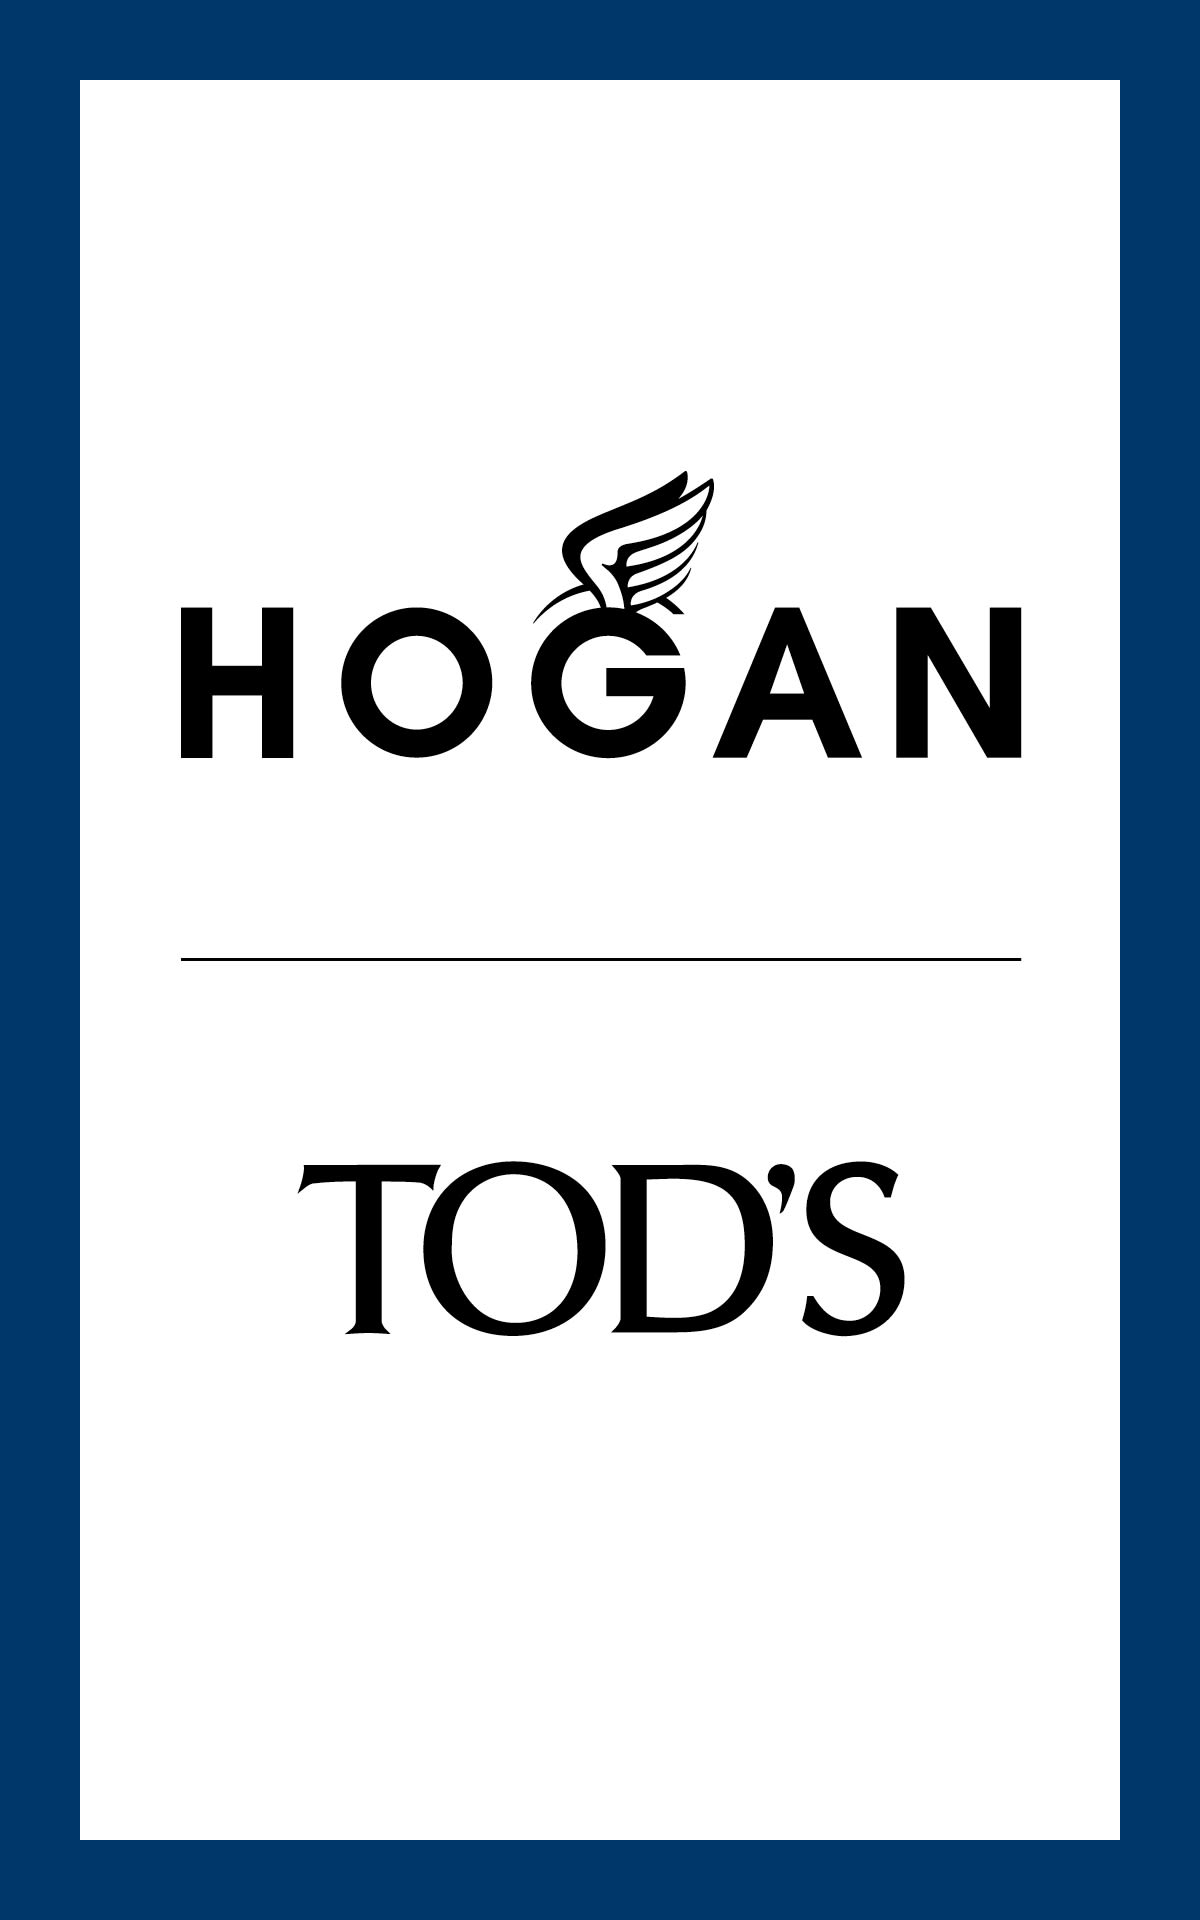 Save the Date | Tod's & Hogan Re-Opening